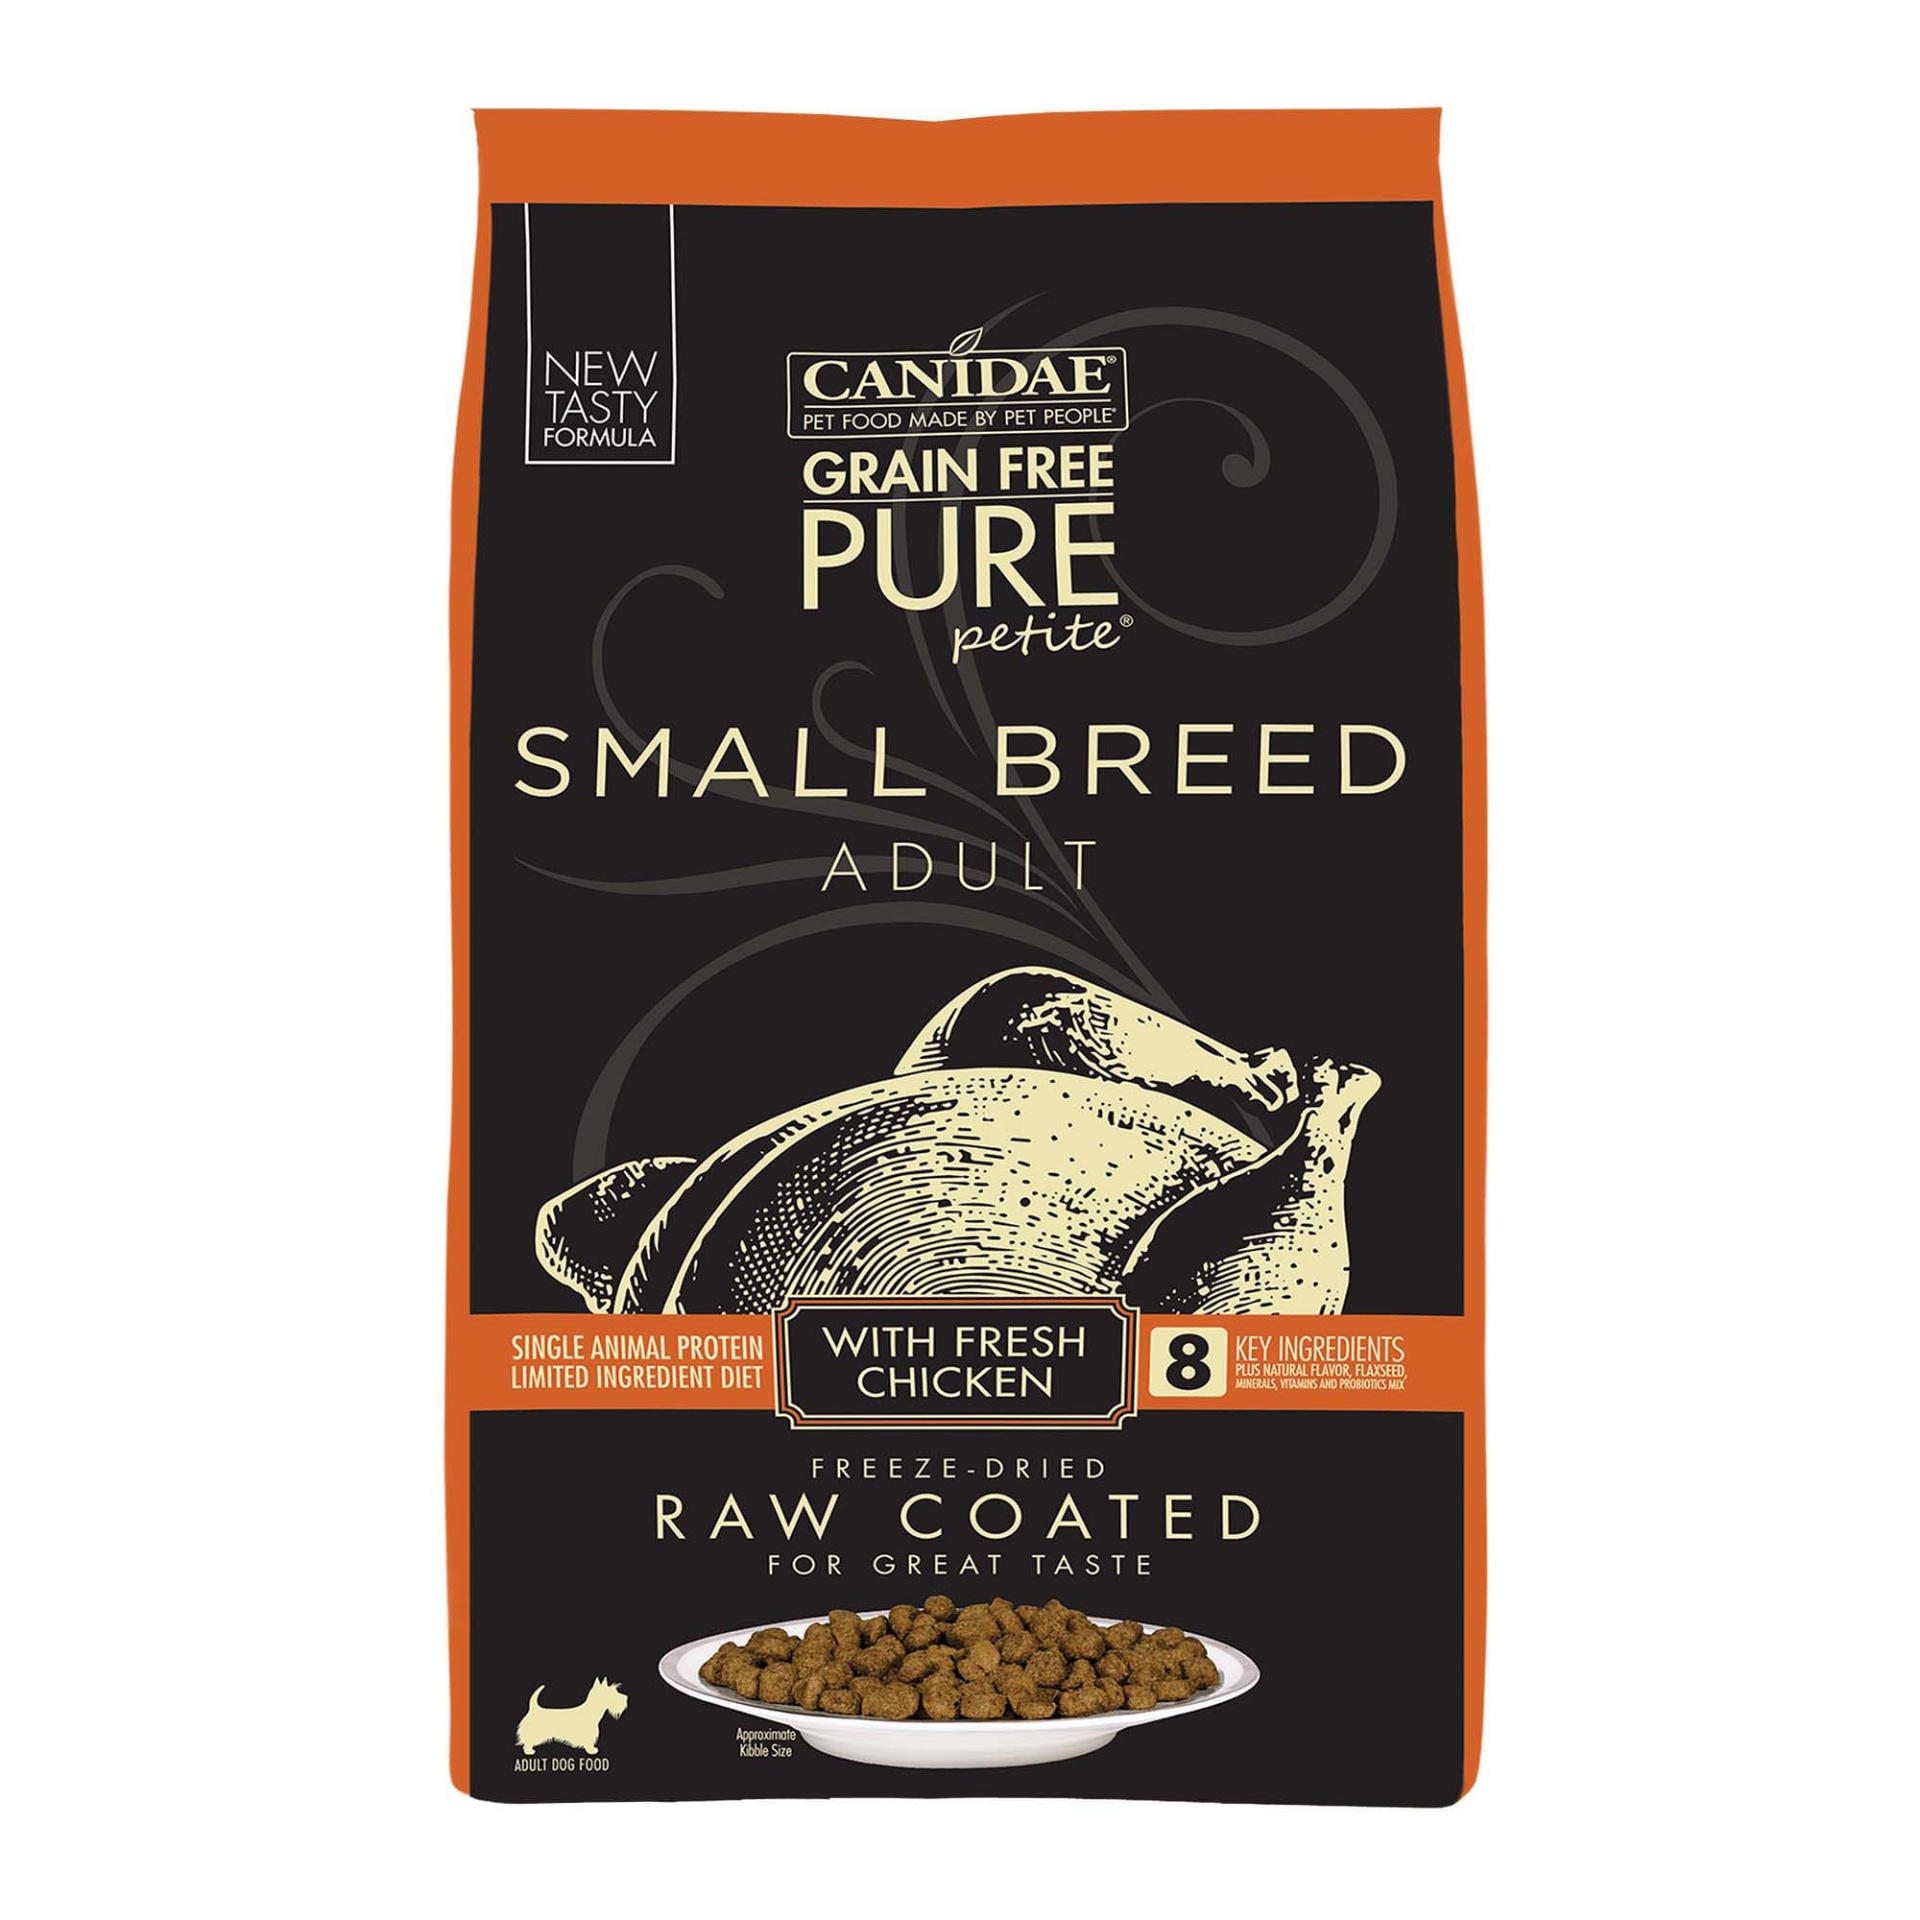 slide 1 of 1, CANIDAE Grain Free PURE Petite Small Breed Dry Dog Food Raw Coated Formula with Chicken, 10 lb